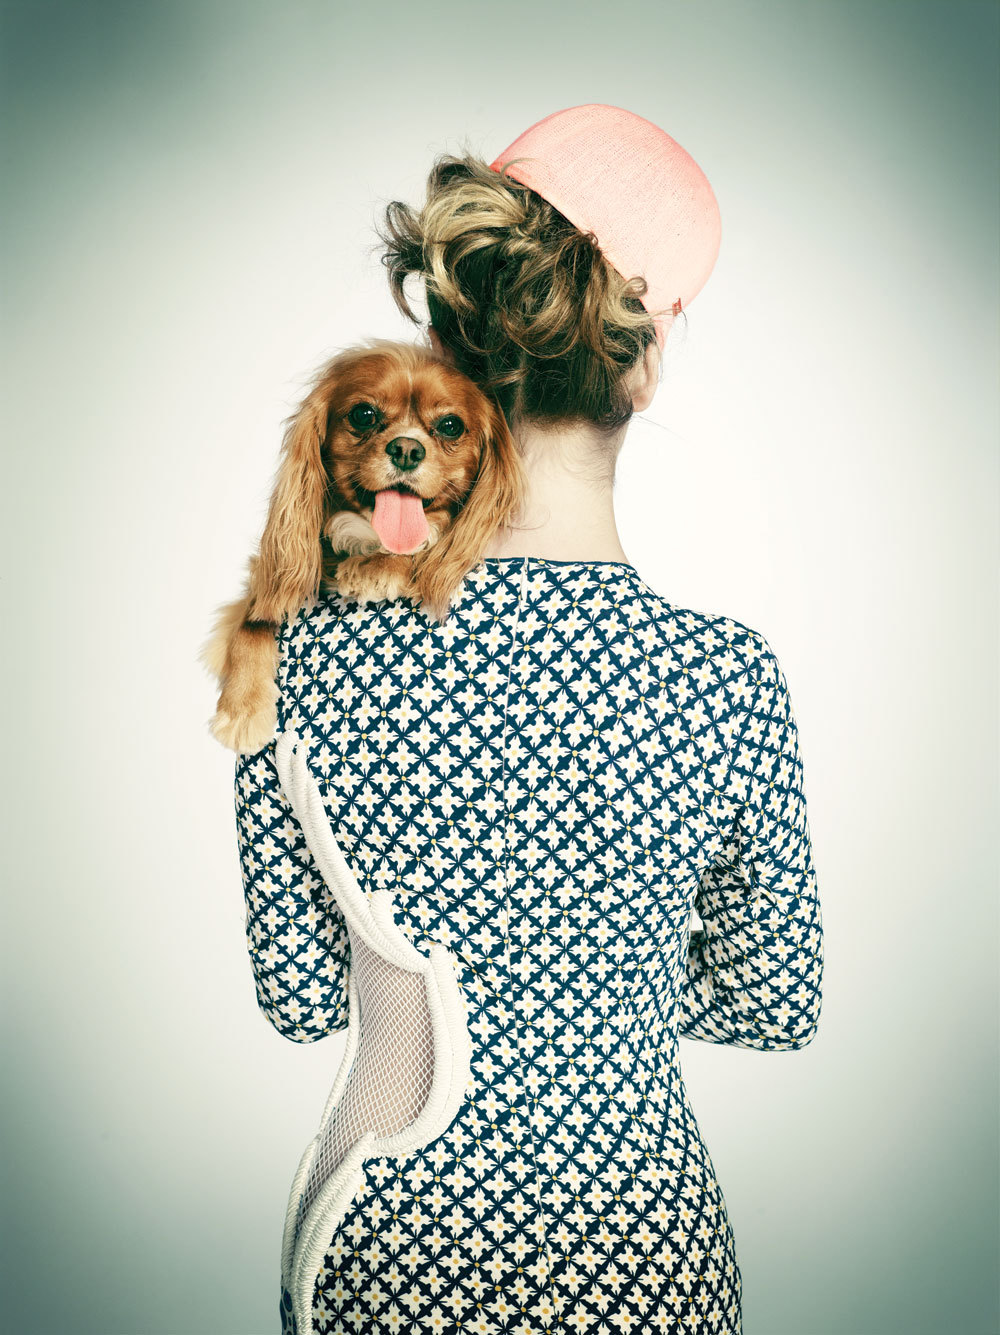 papermagazine:
“In honor of National Dog Day, our “Dog Days” style story shot by Emily Shur. A Paper favorite.
”